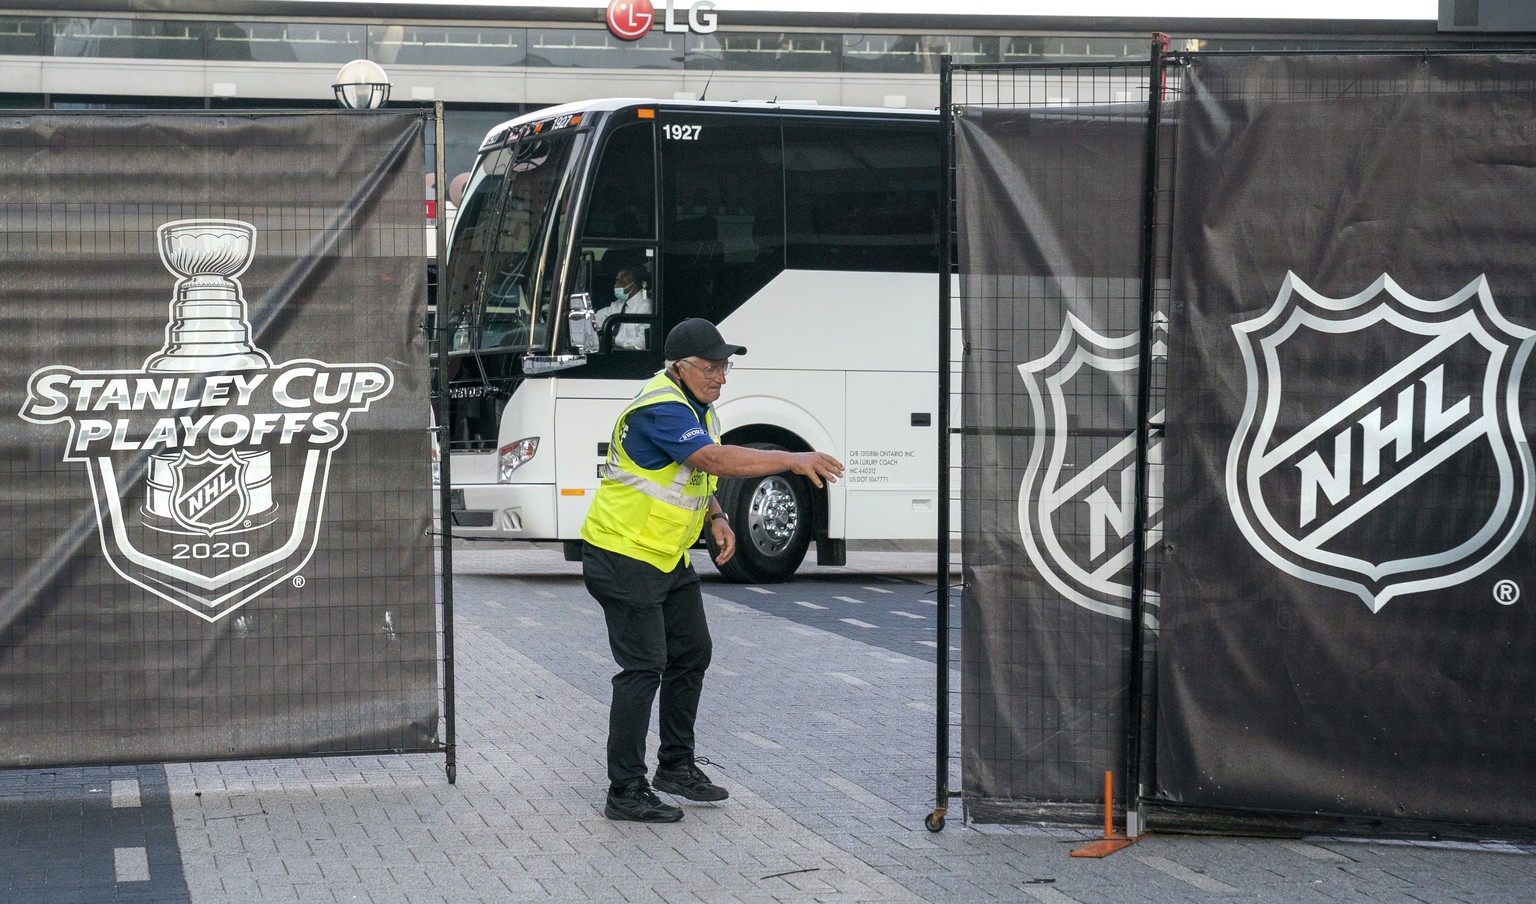 A security guard opens a gate for an empty player bus as it departs Scotiabank Arena in Toronto on Thursday, Aug. 27, 2020. The NHL postponed two days of playoff games Thursday after withering critici ...